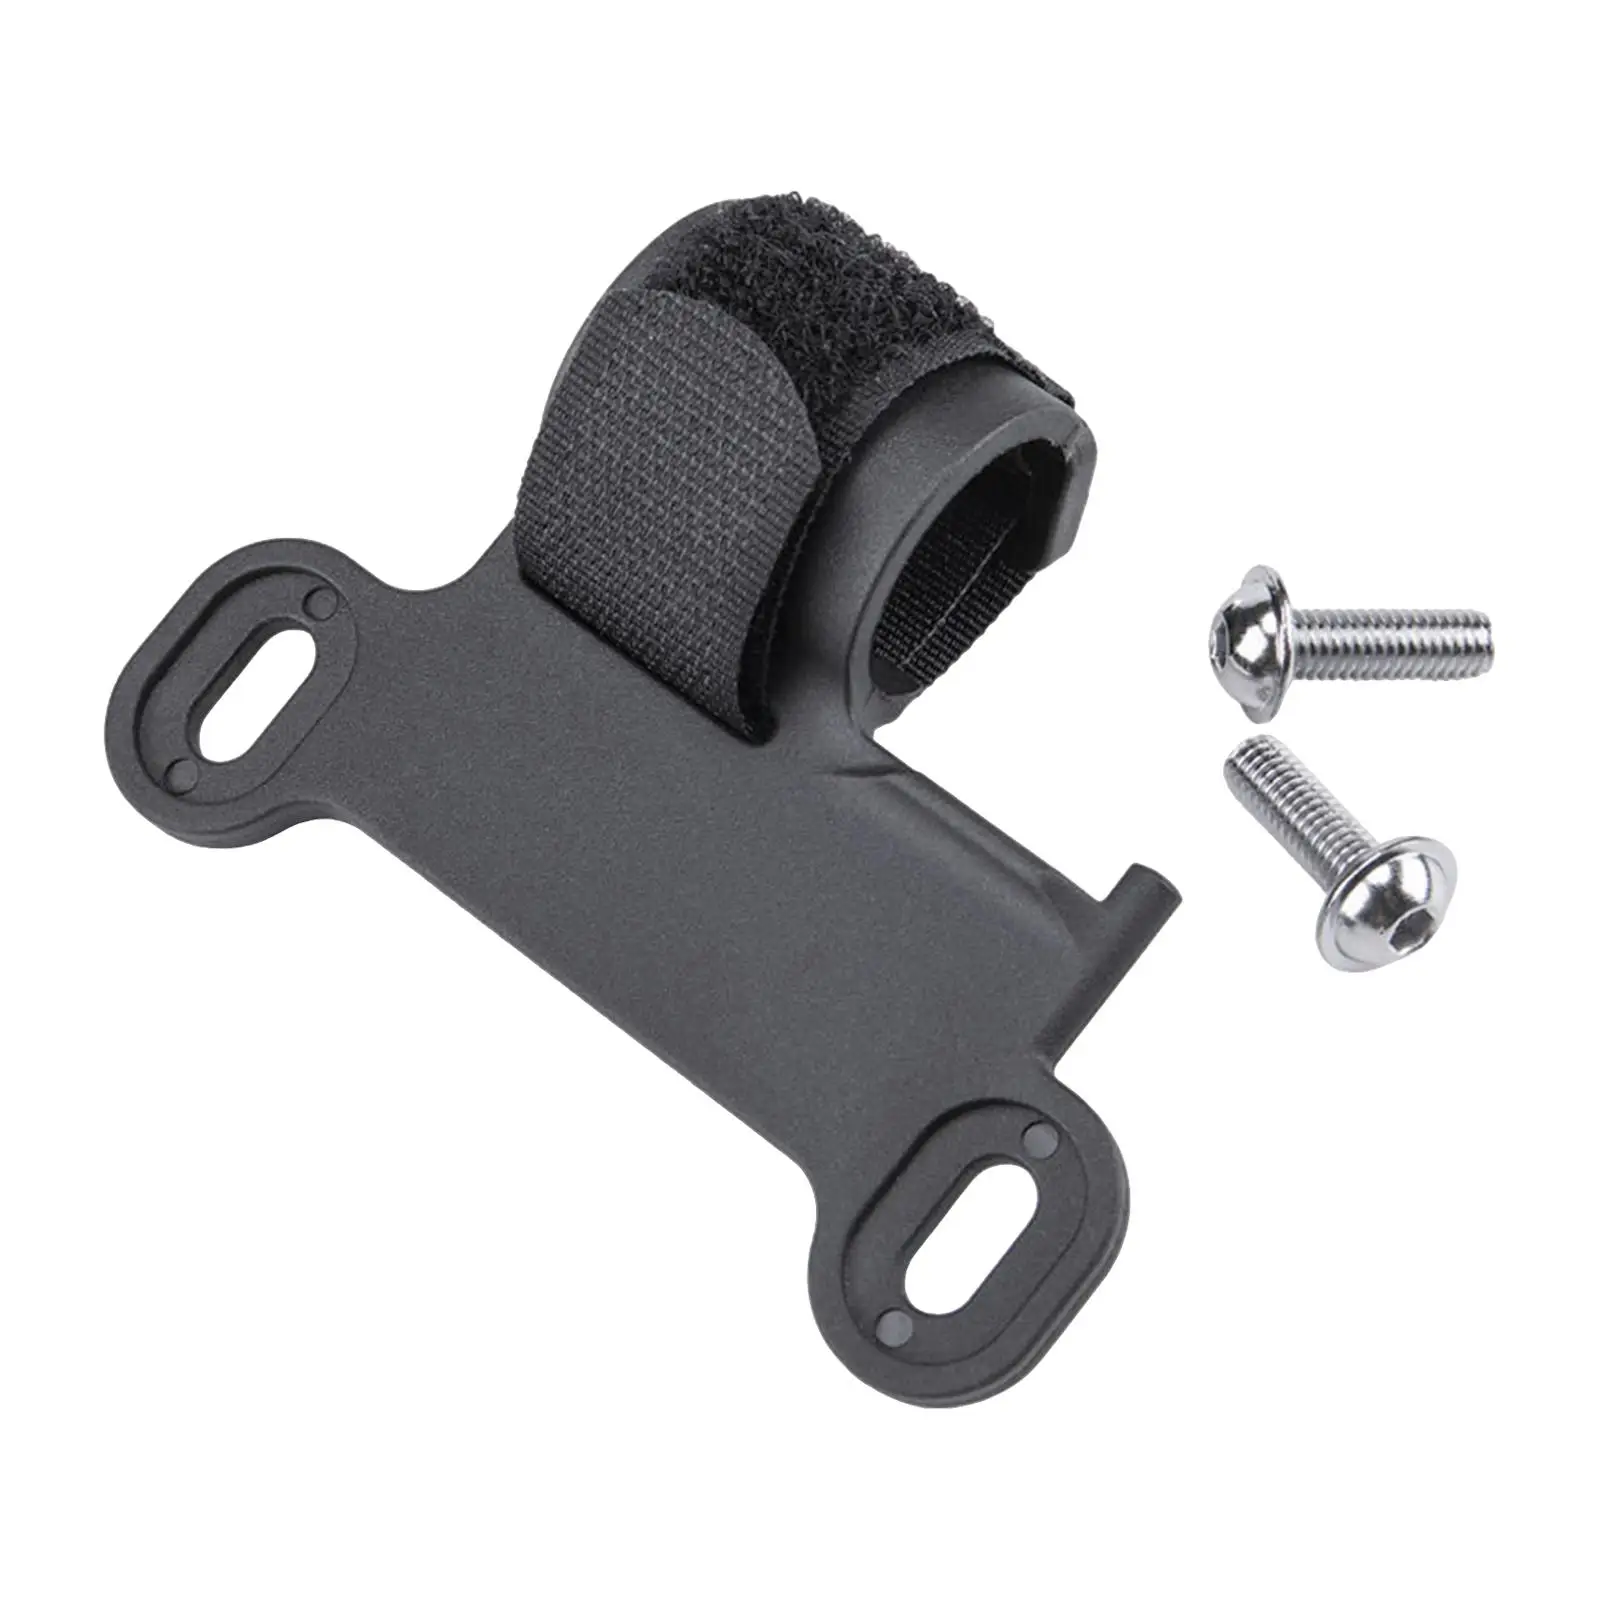 Bicycle Pump Holder Bracket Parts Durable Accessories Tool for Mountain Bike